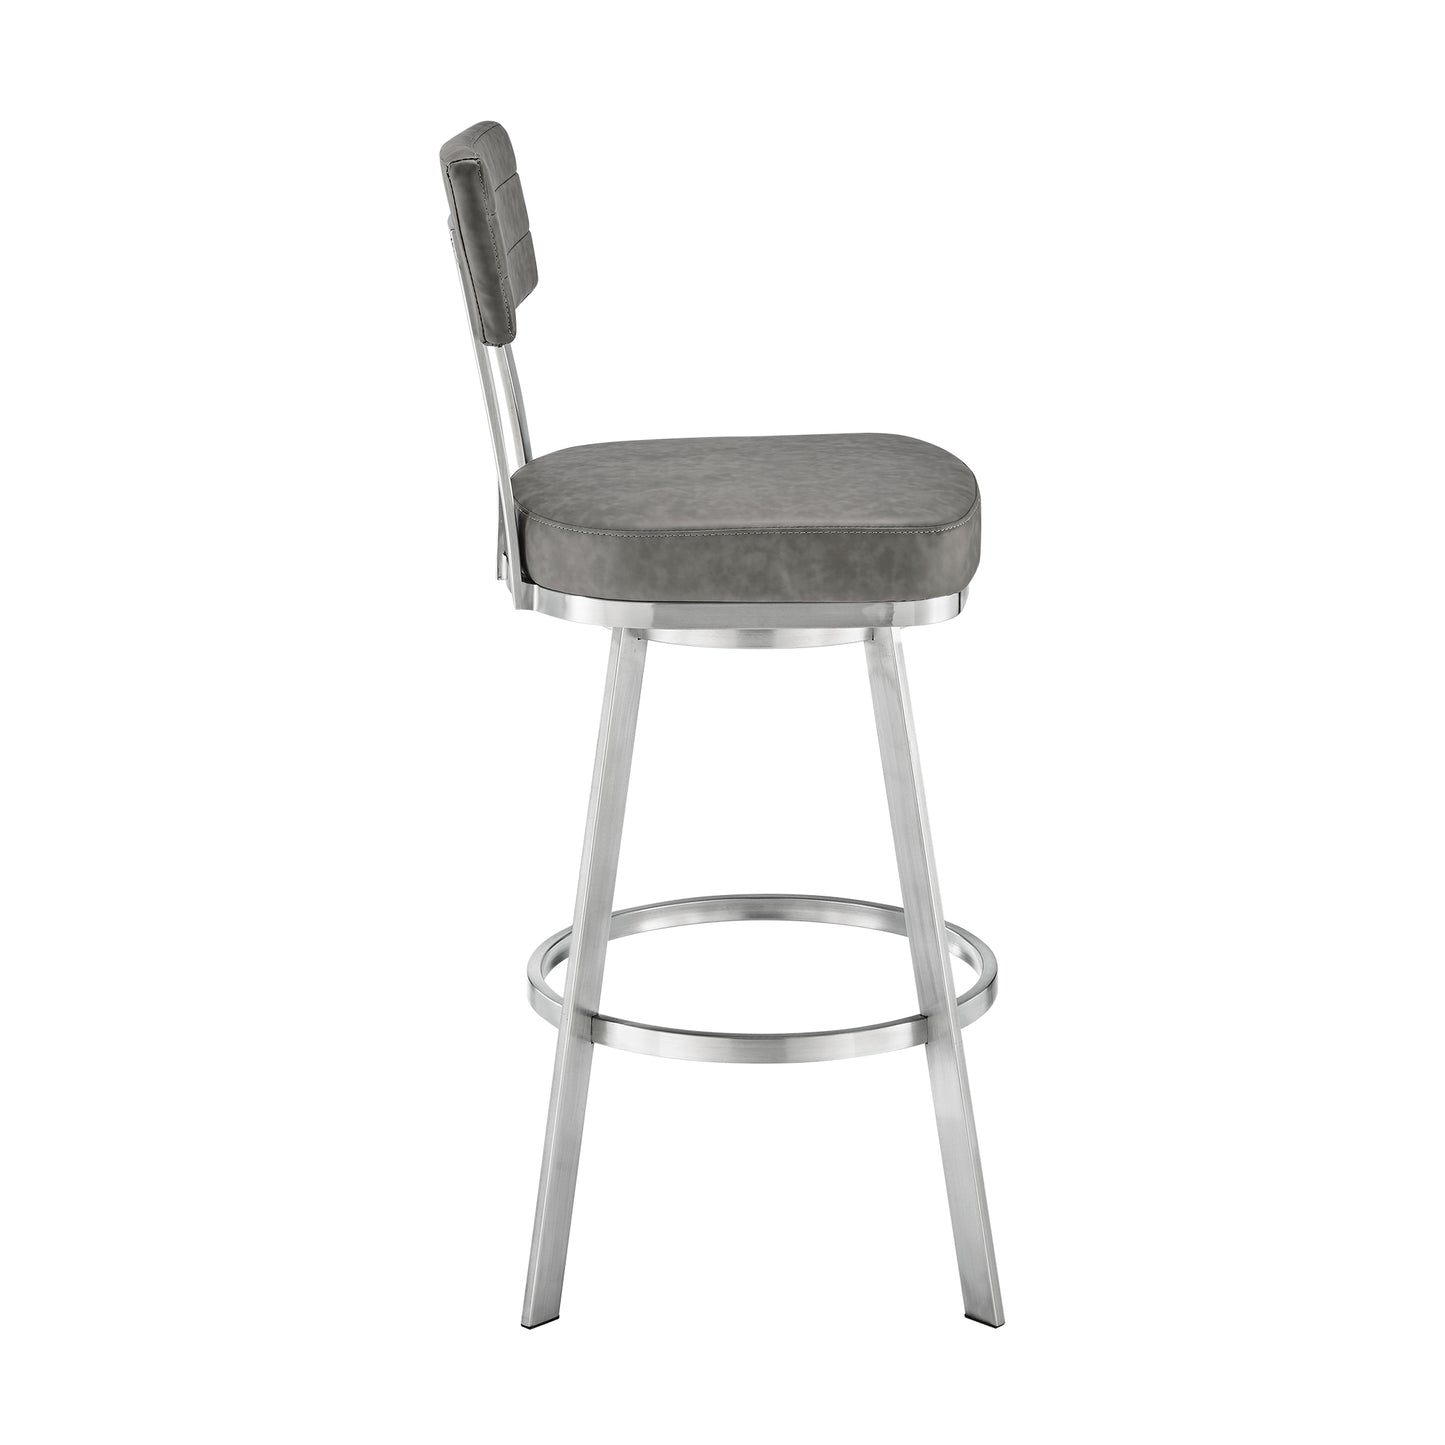 Benjamin 26" Swivel Counter Stool in Brushed Stainless Steel with Gray Faux Leather